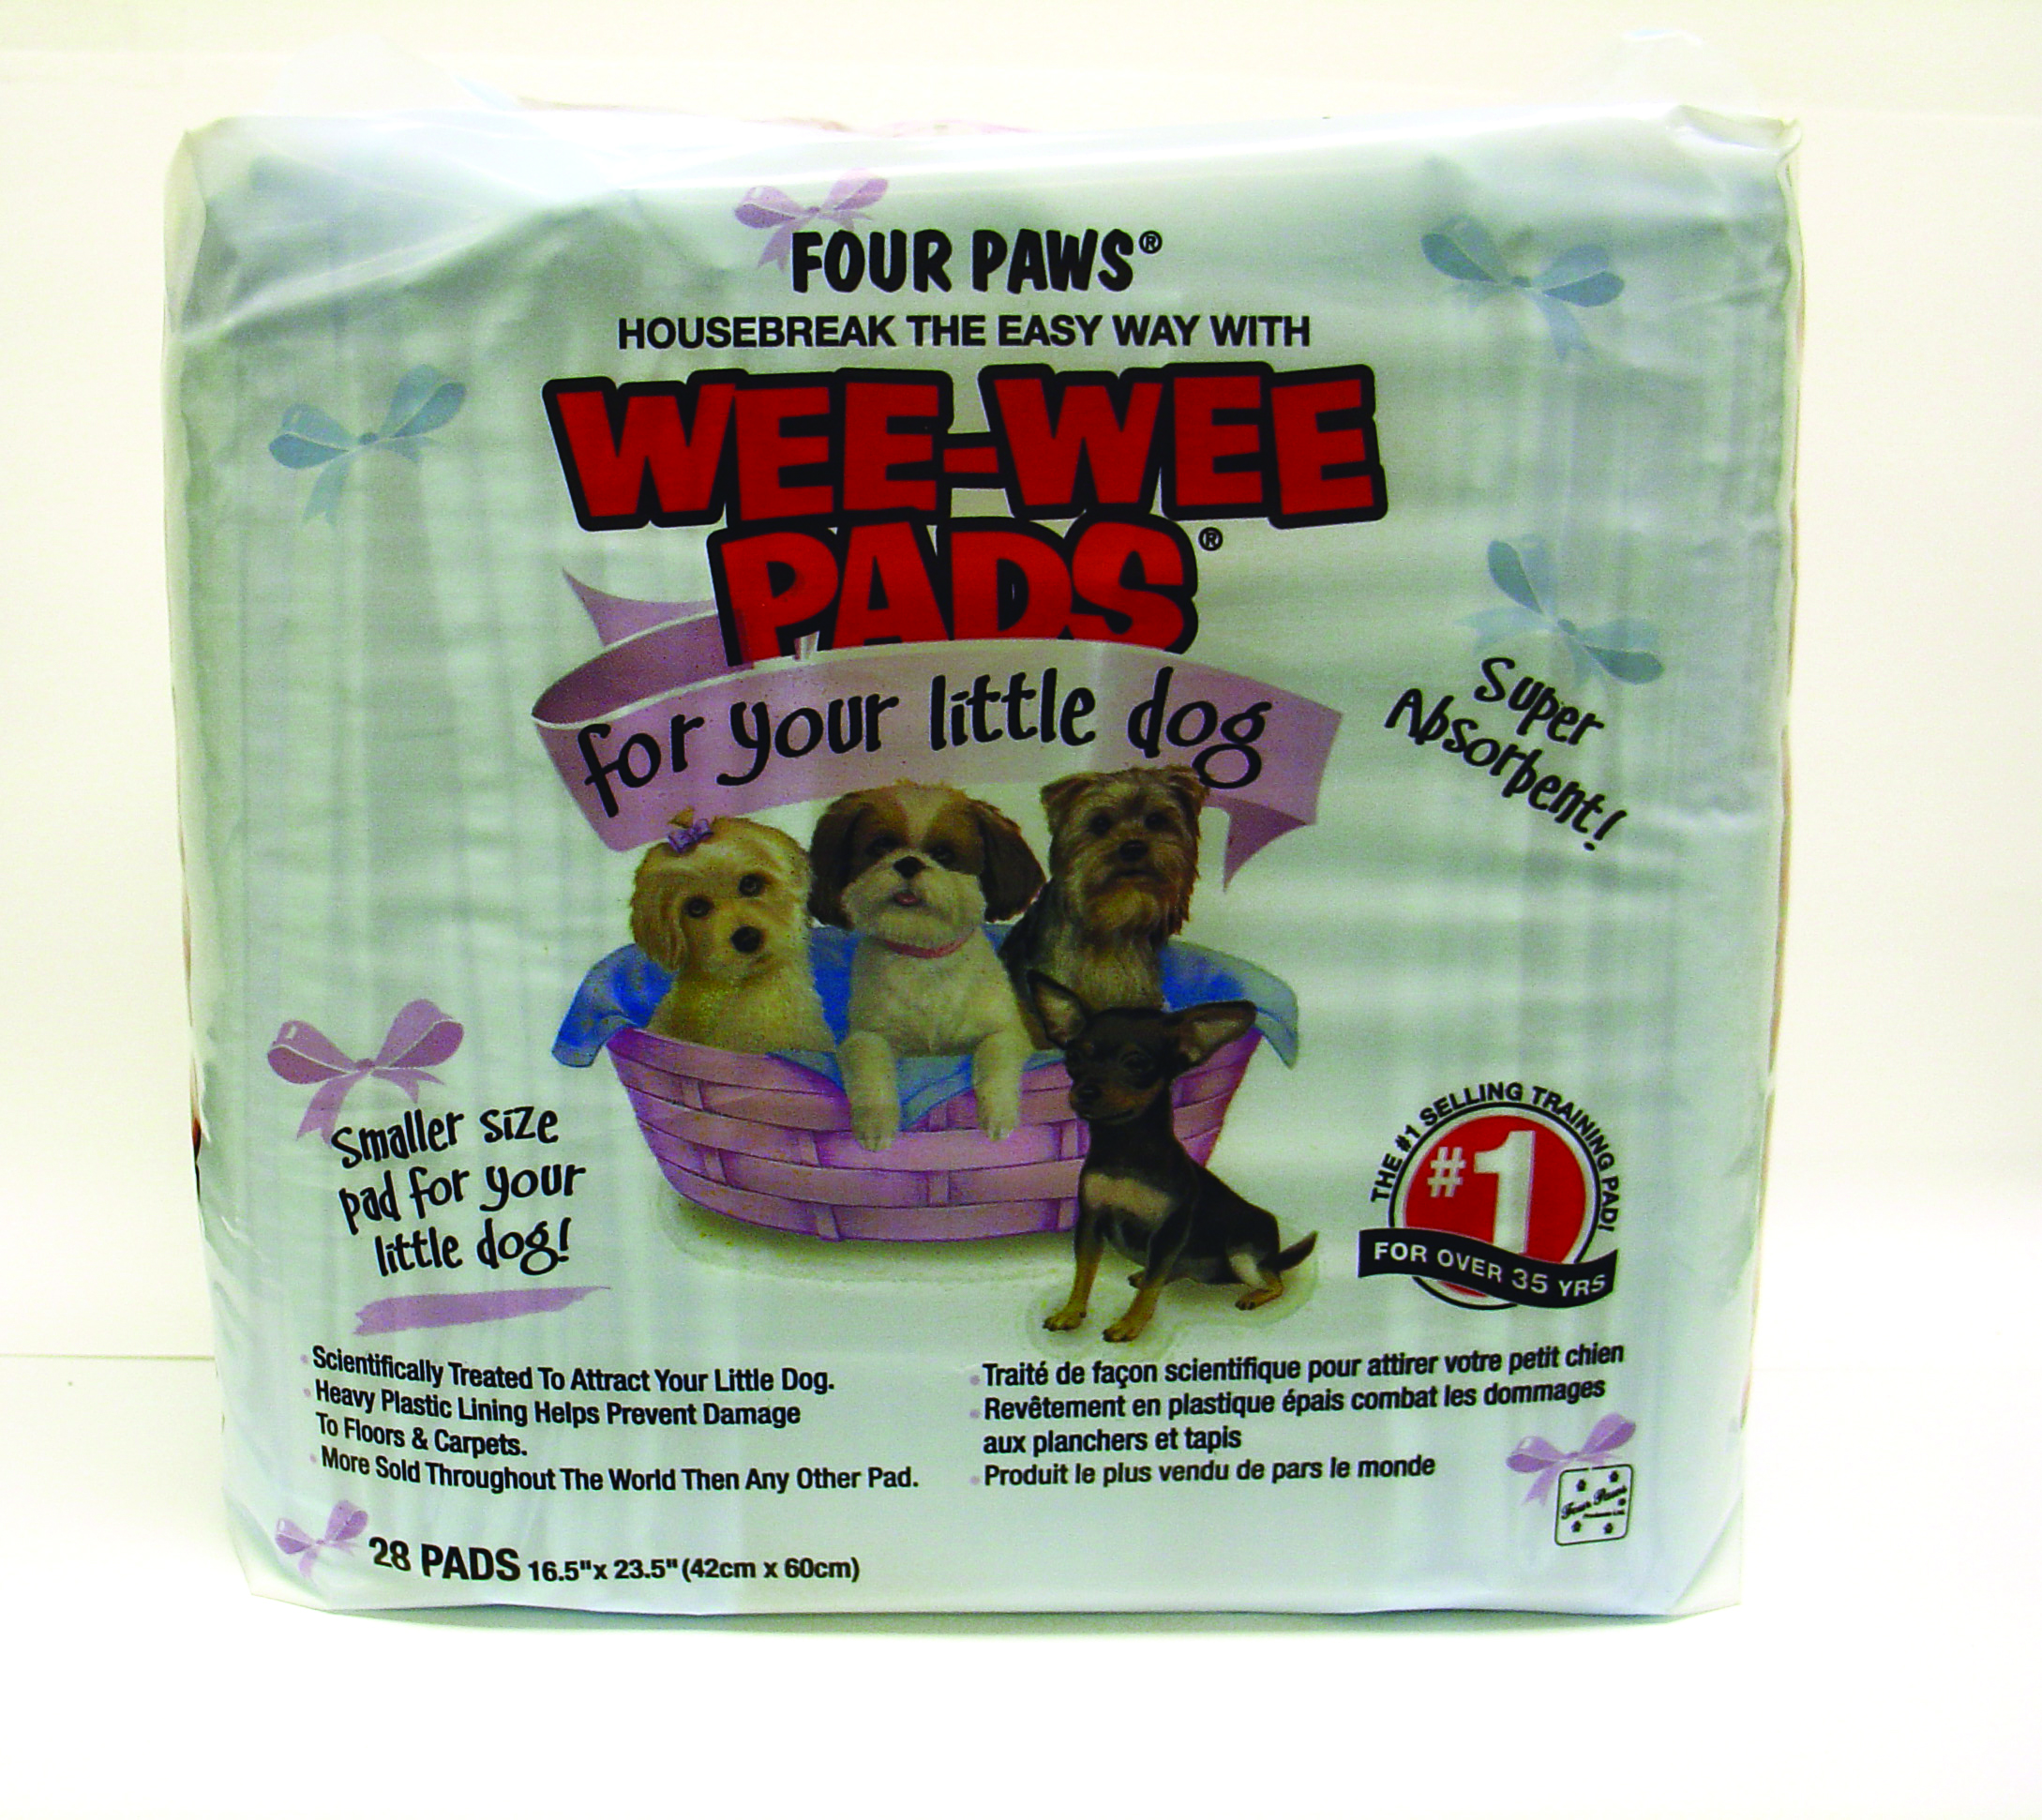 WEE WEE PADS FOR LITTLE DOGS